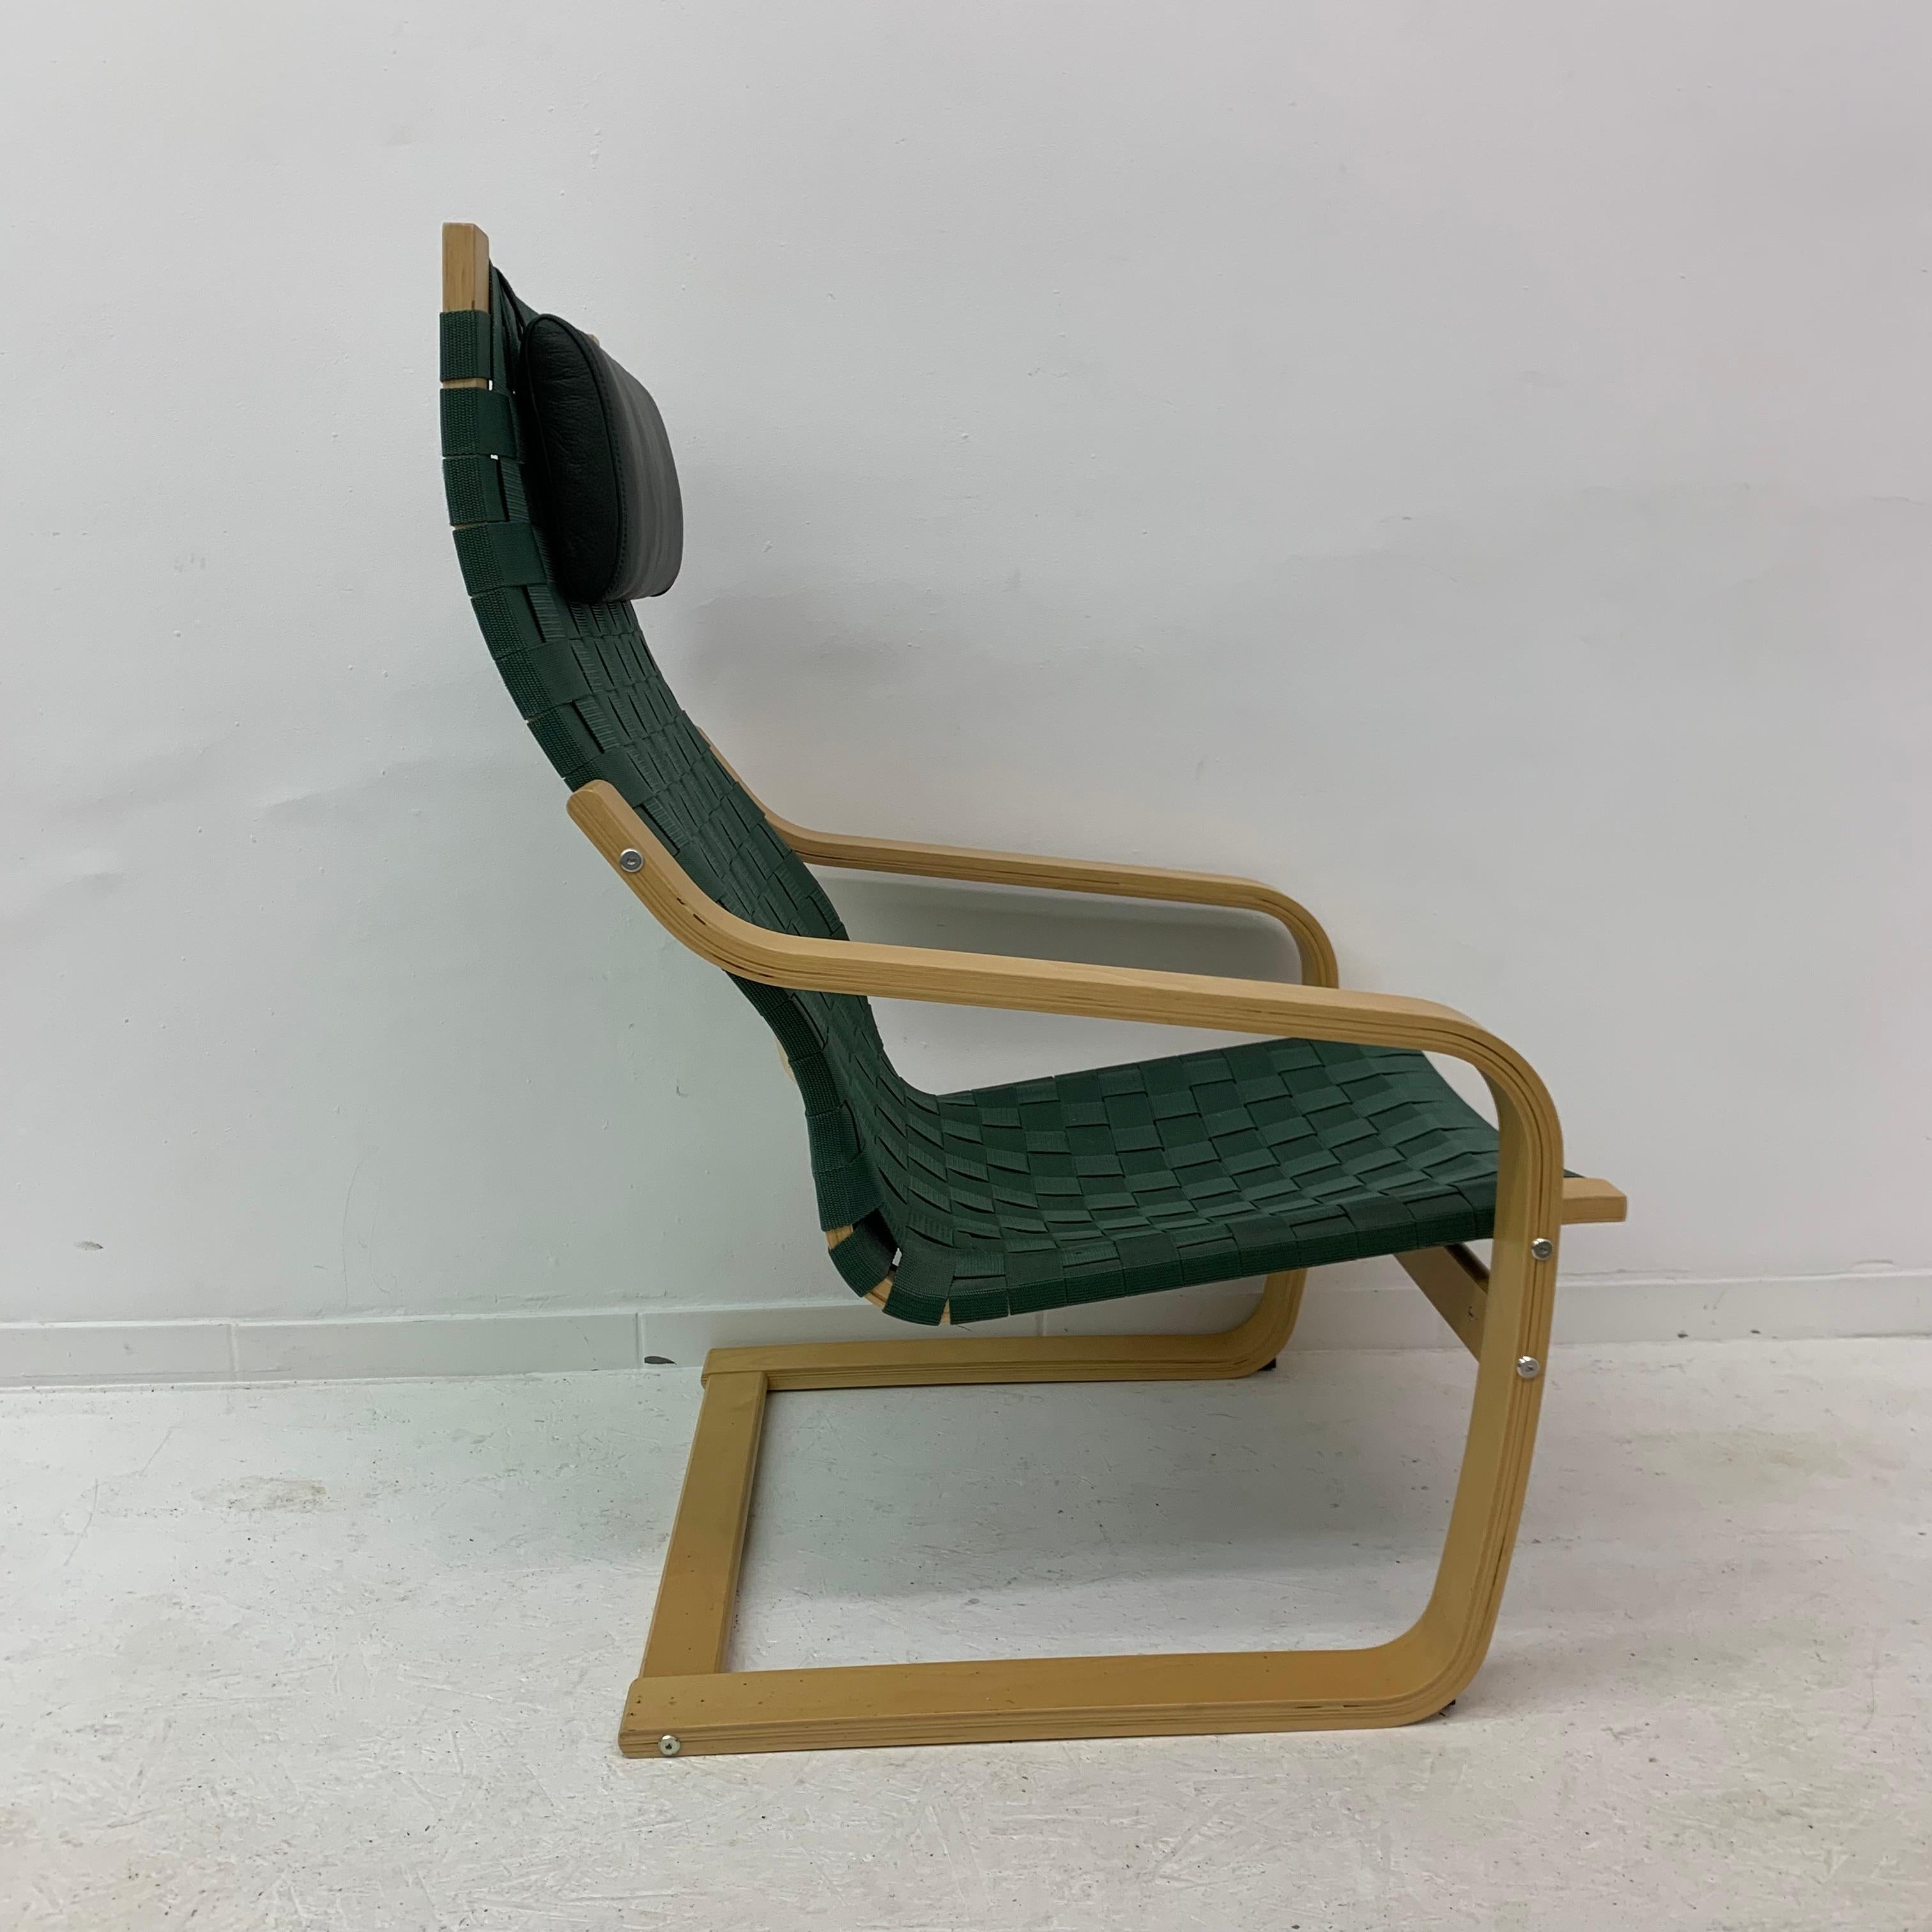 Limited Edition Aalto Tribute Points Chair by Noboru Nakamura for Ikea, 1999 For Sale 2